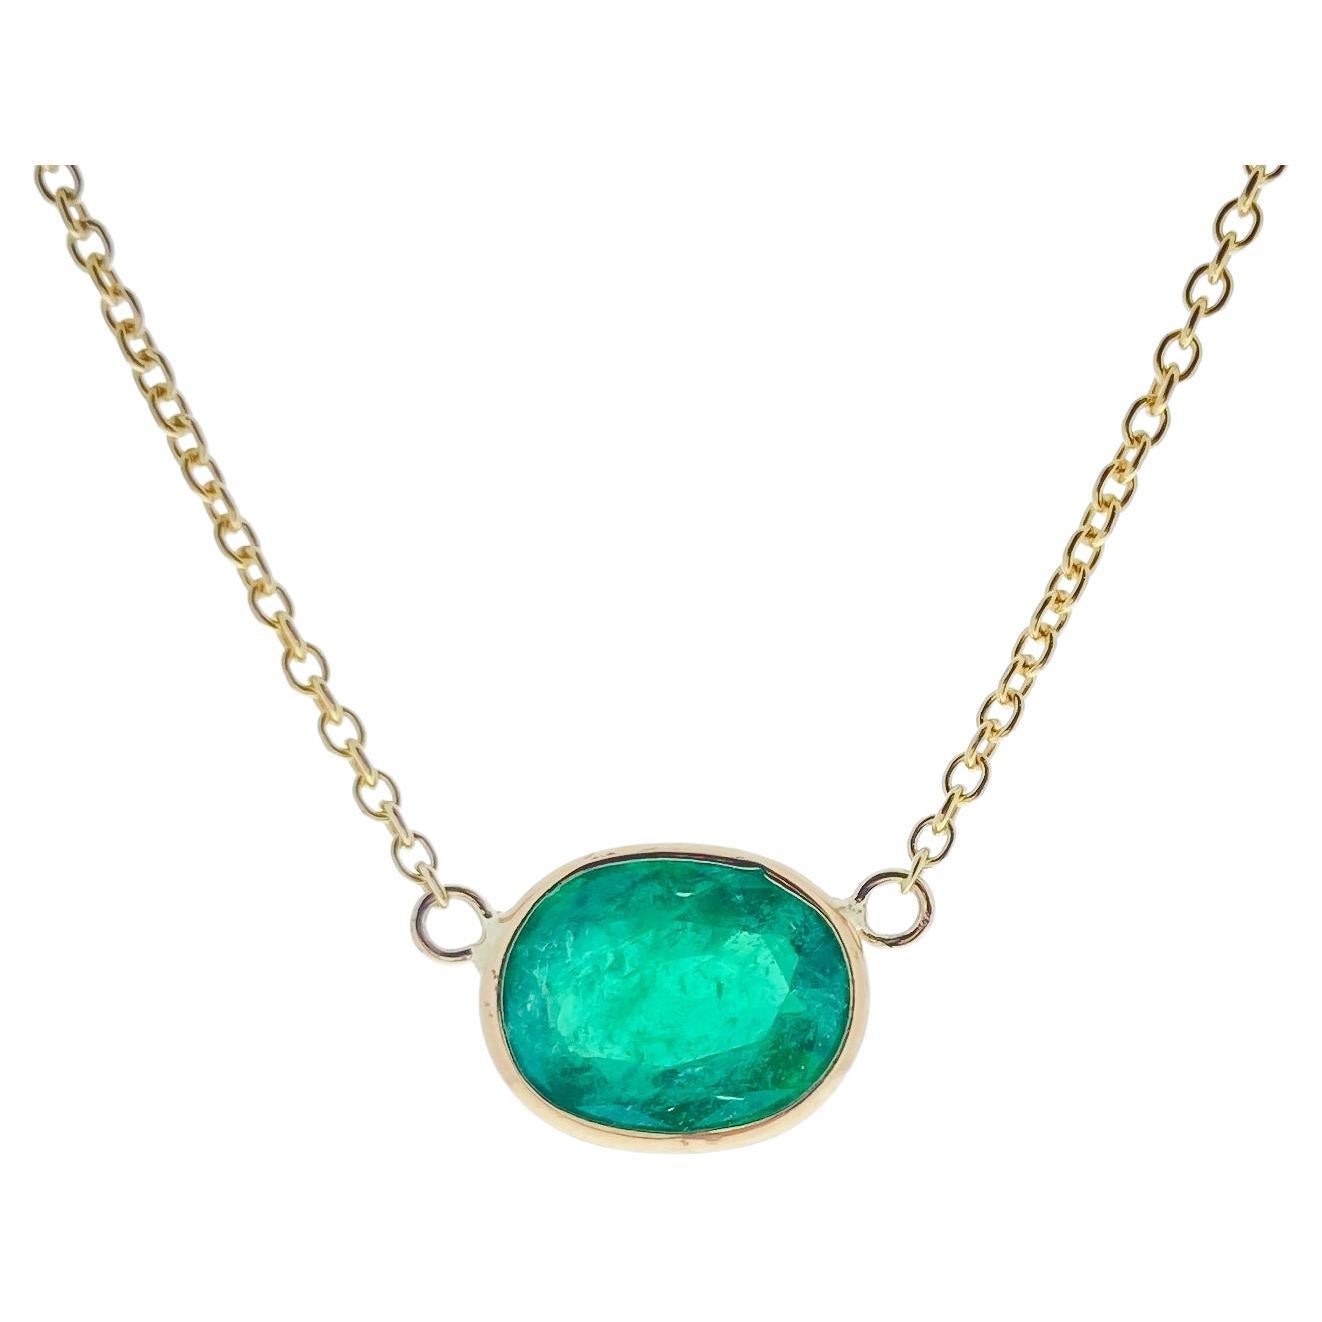 1.64 Carat Green Emerald Oval Cut Fashion Necklaces In 14K Yellow Gold For Sale